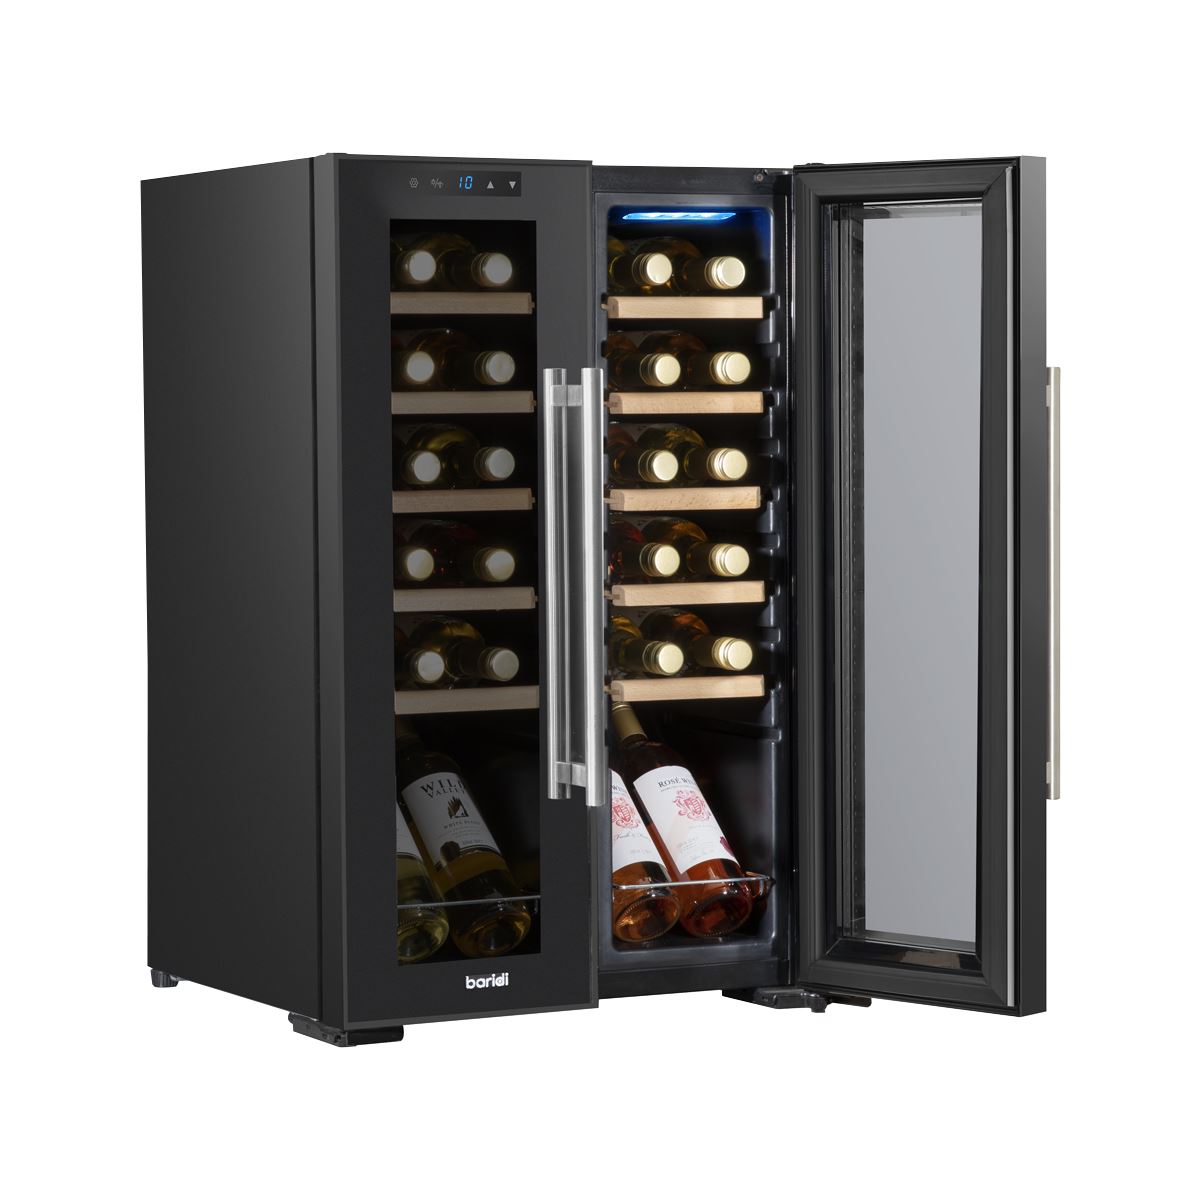 Baridi 24 Bottle Dual Zone Wine Cooler, Fridge, Touch Screen, LED Light Black and Mirror Glass Door